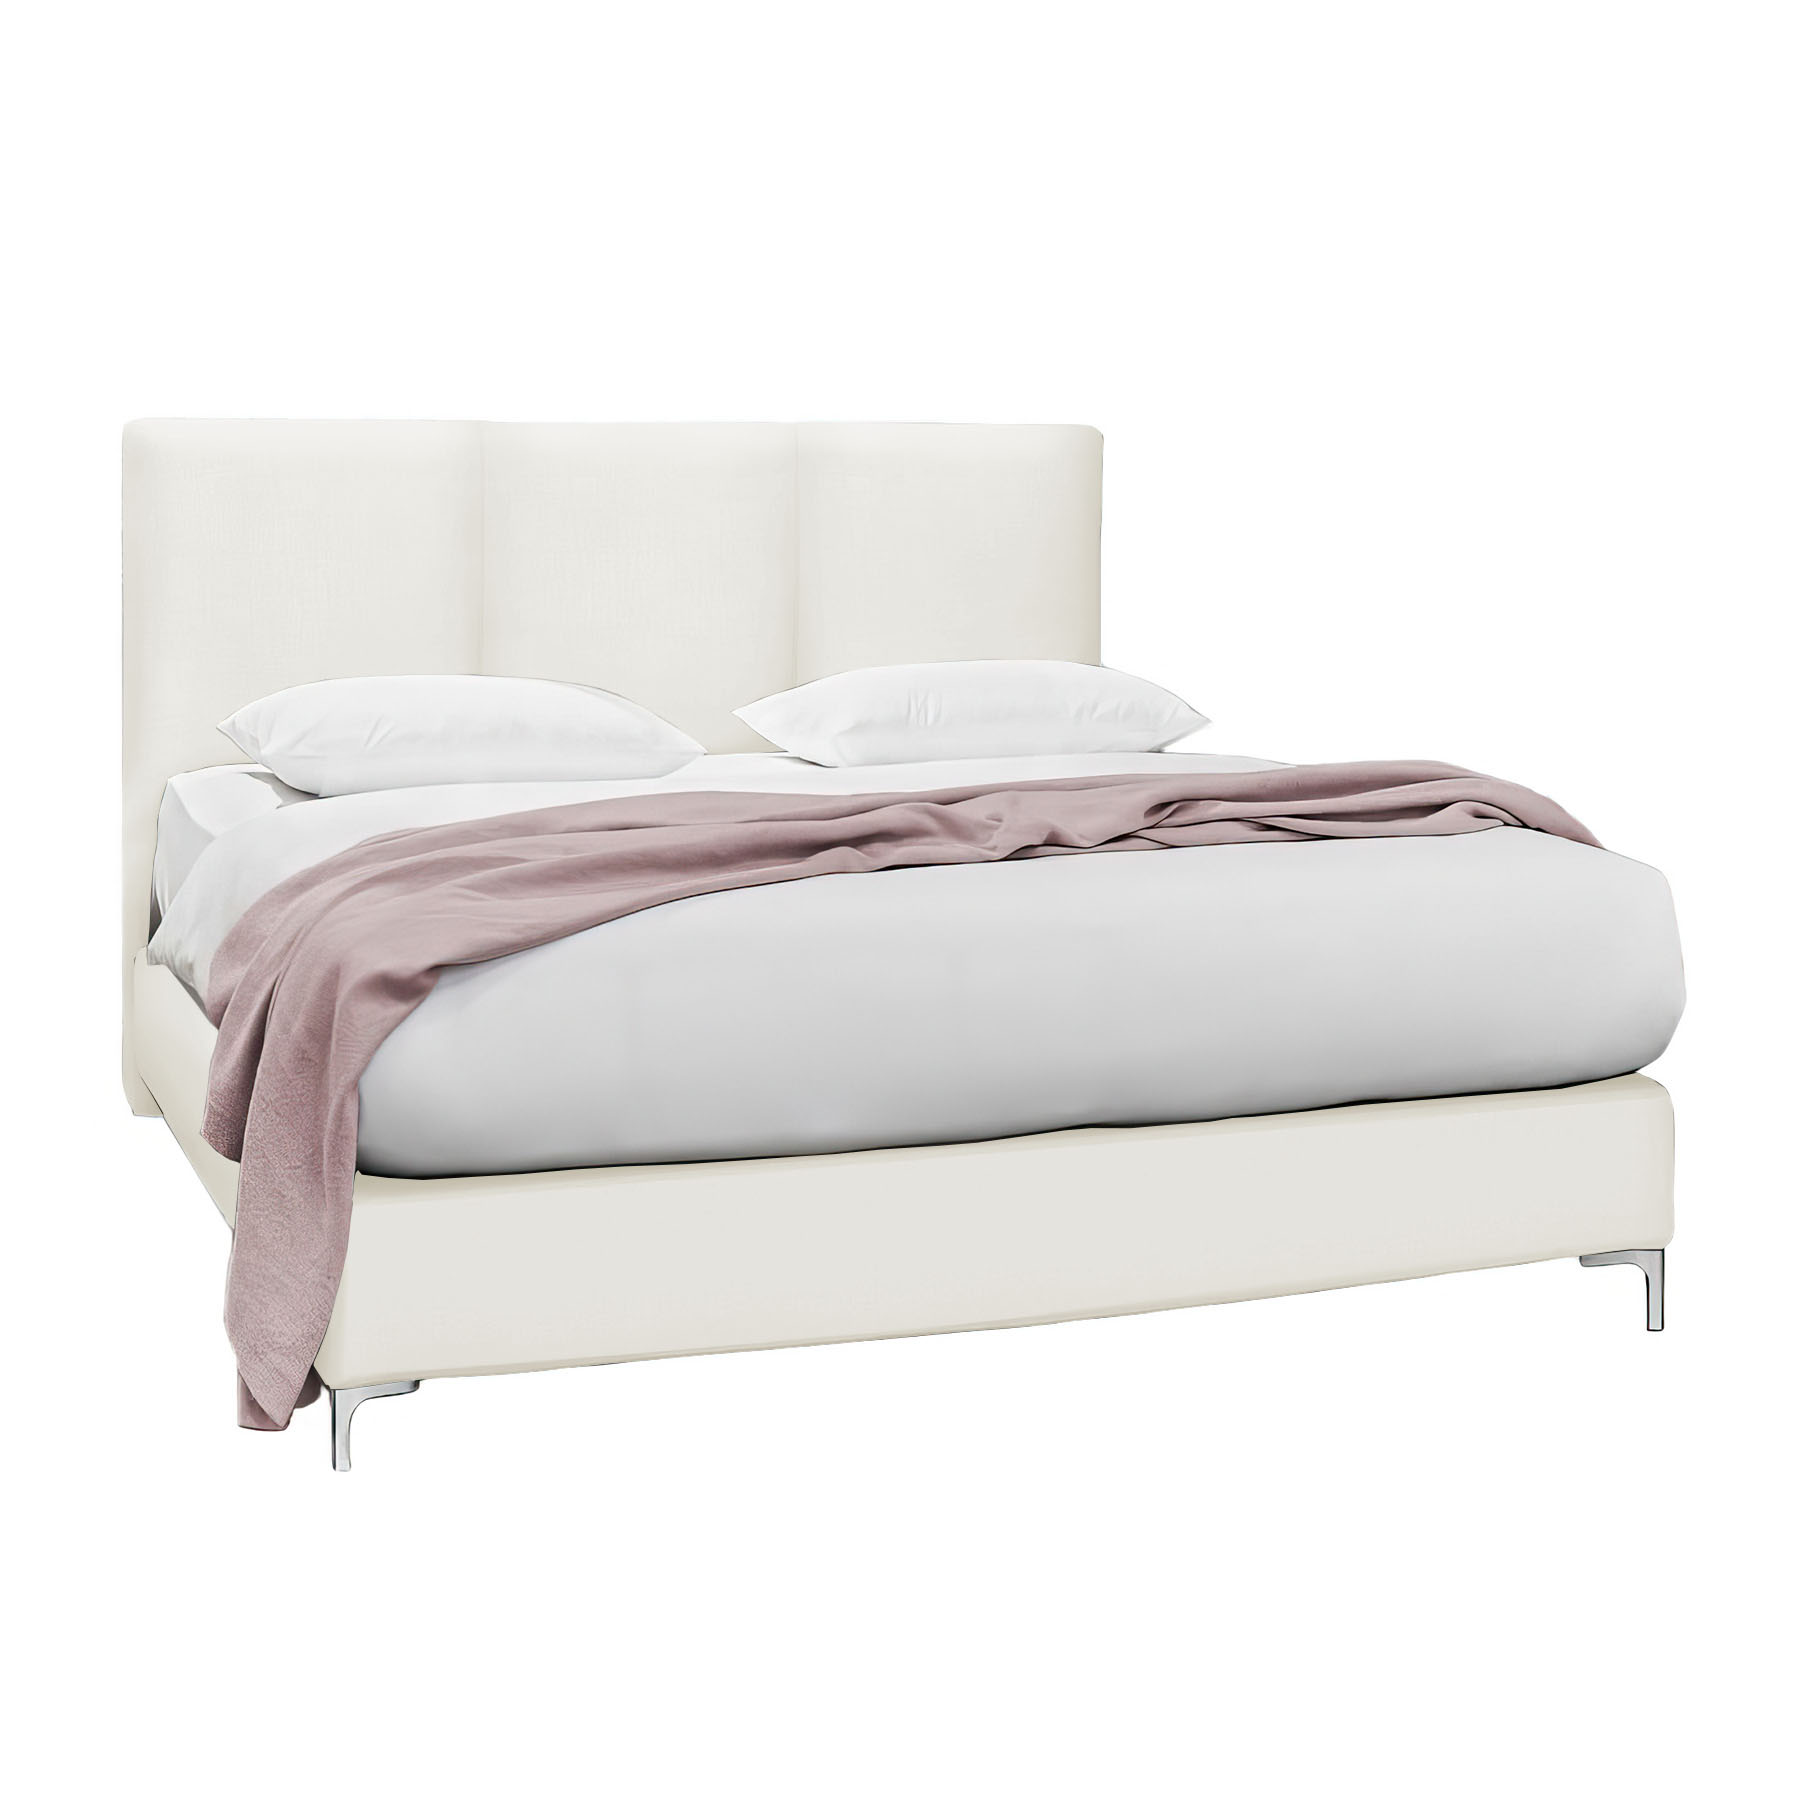 Boxspringbett Kate Select 180/200cm in Hot Madison Wollweiß